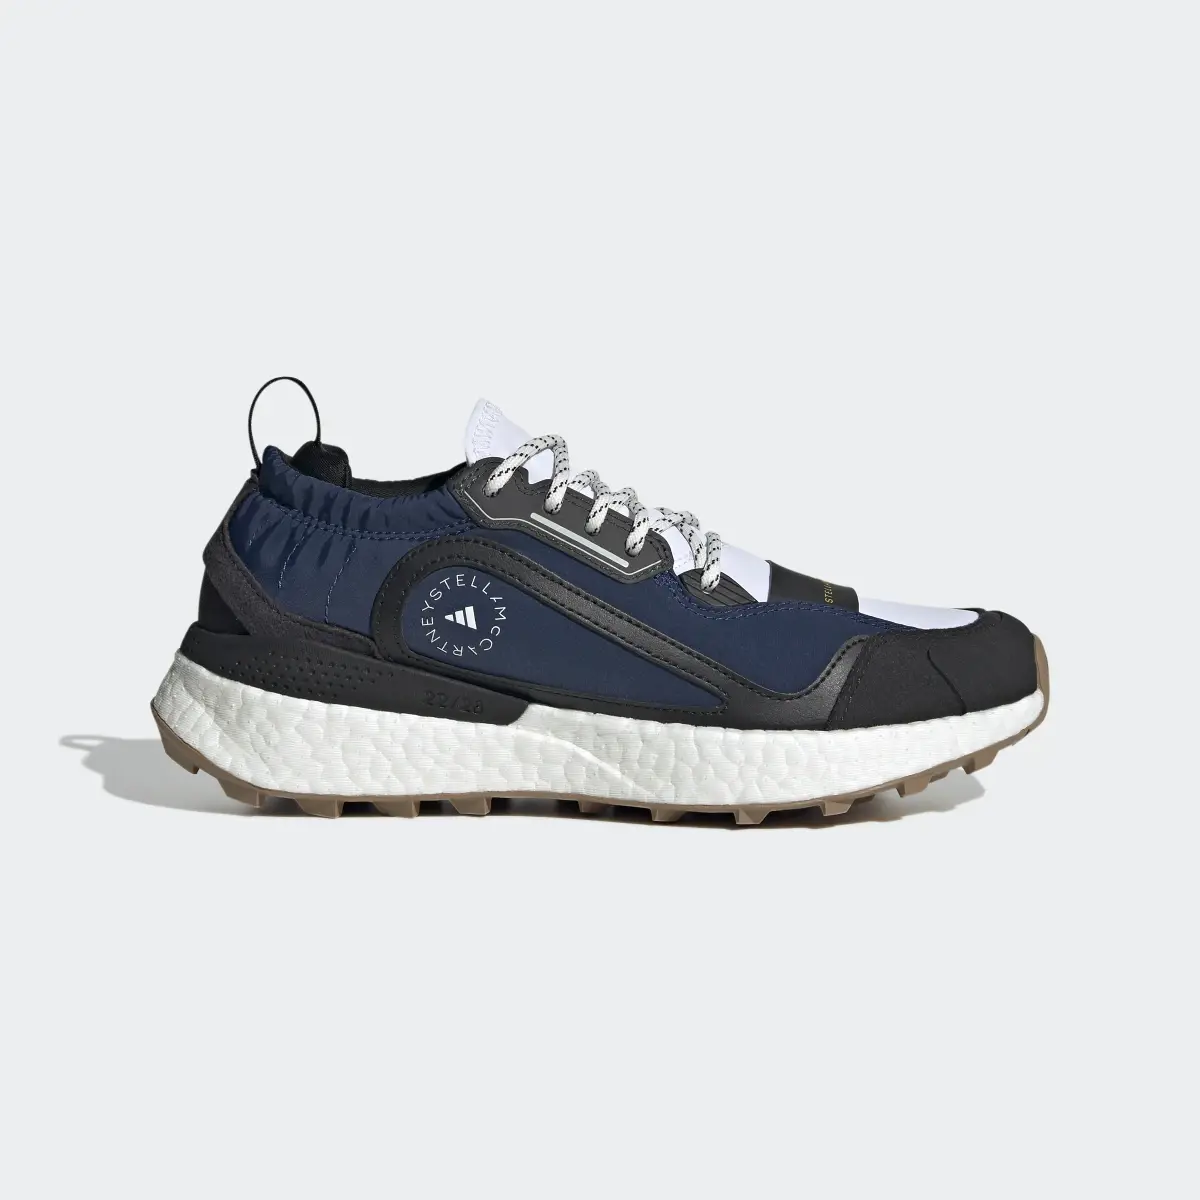 Adidas by Stella McCartney Outdoorboost 2.0 COLD.RDY Laufschuh. 2